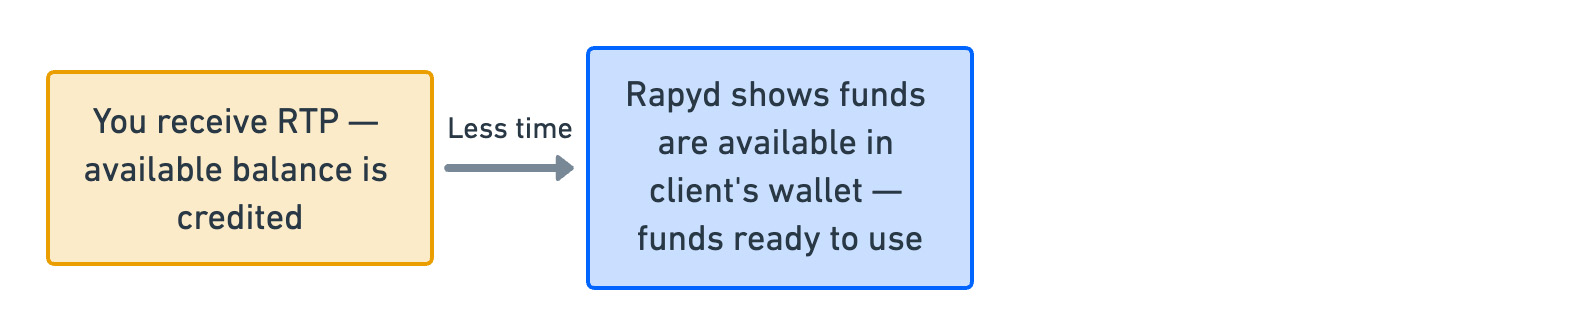 bank-transfer-rtp-to-client-wallet.jpg